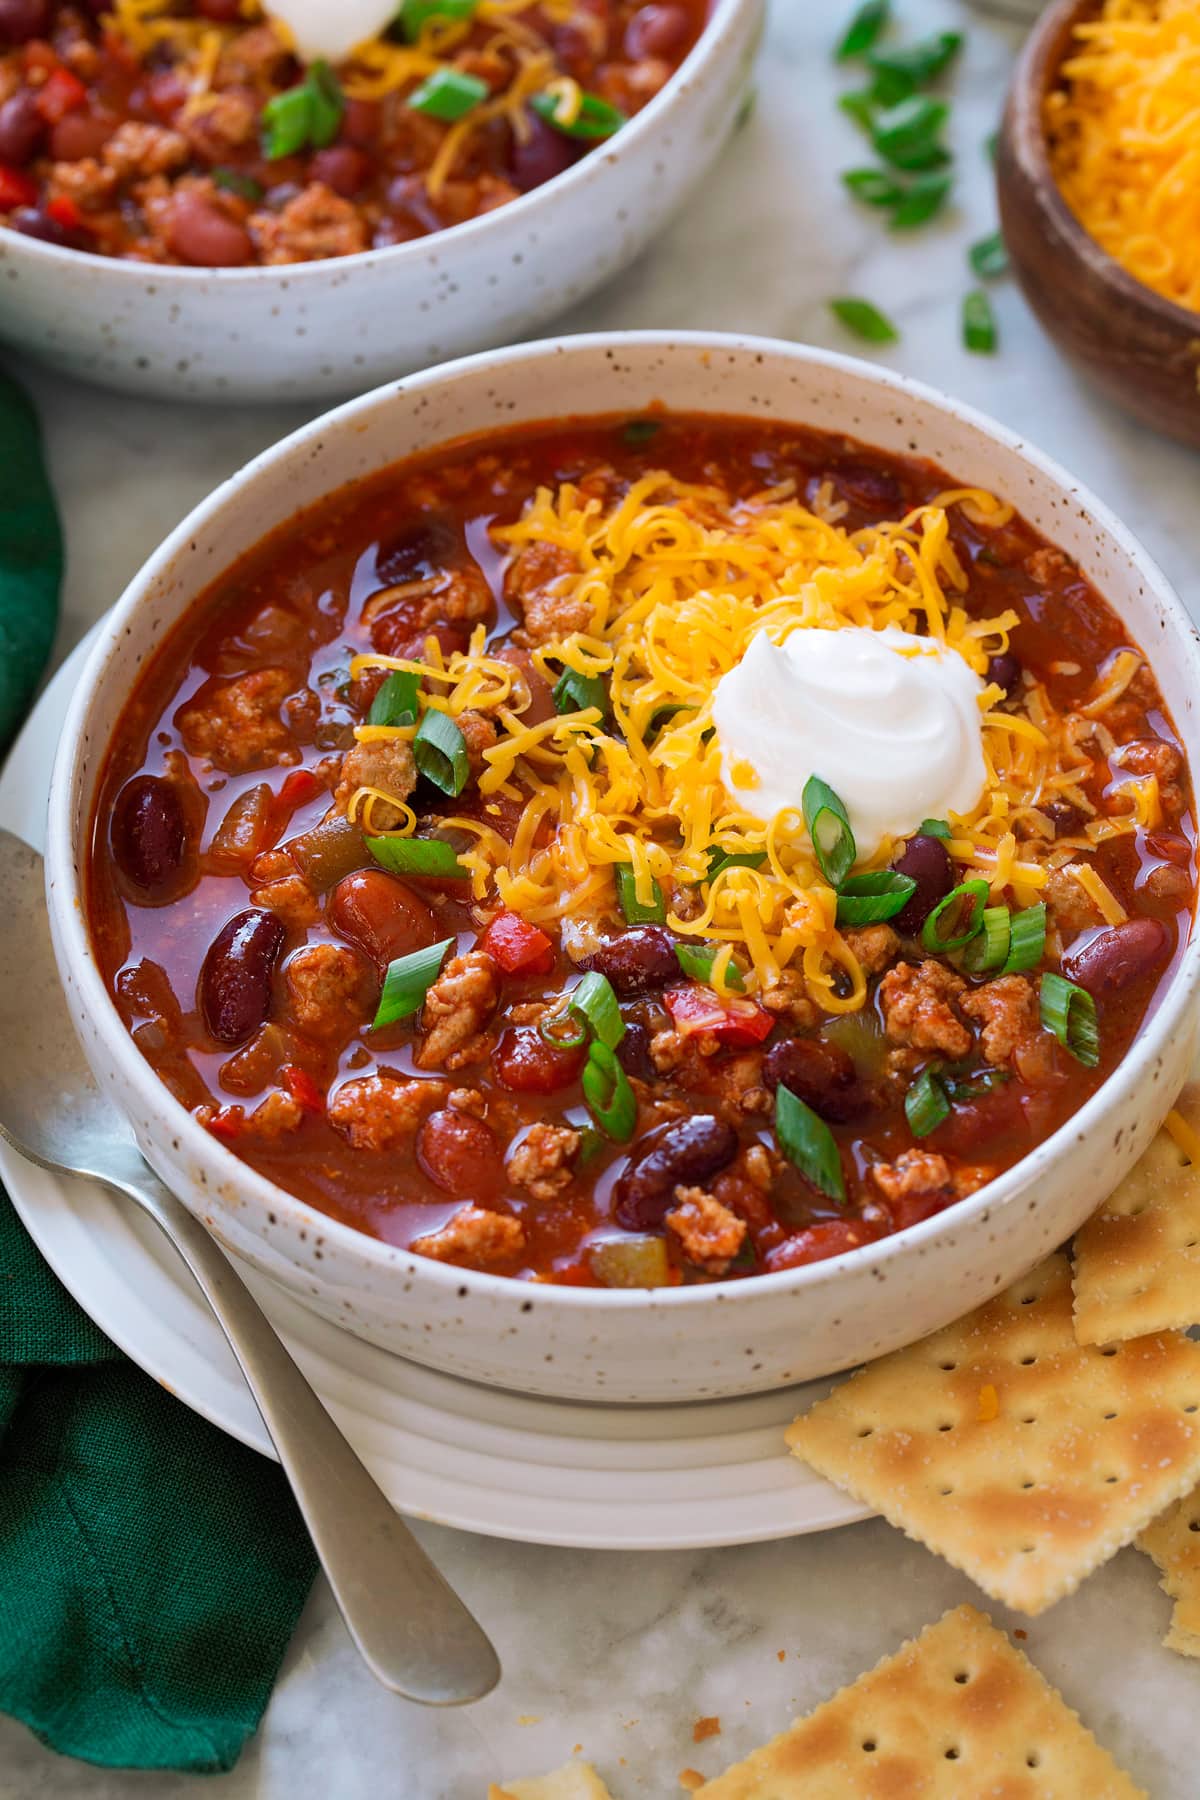 Serving of turkey chili in a white bowl set over a white plate with a spoon and saltine crackers to the side. Chili is topped with shredded cheddar cheese and sour cream.